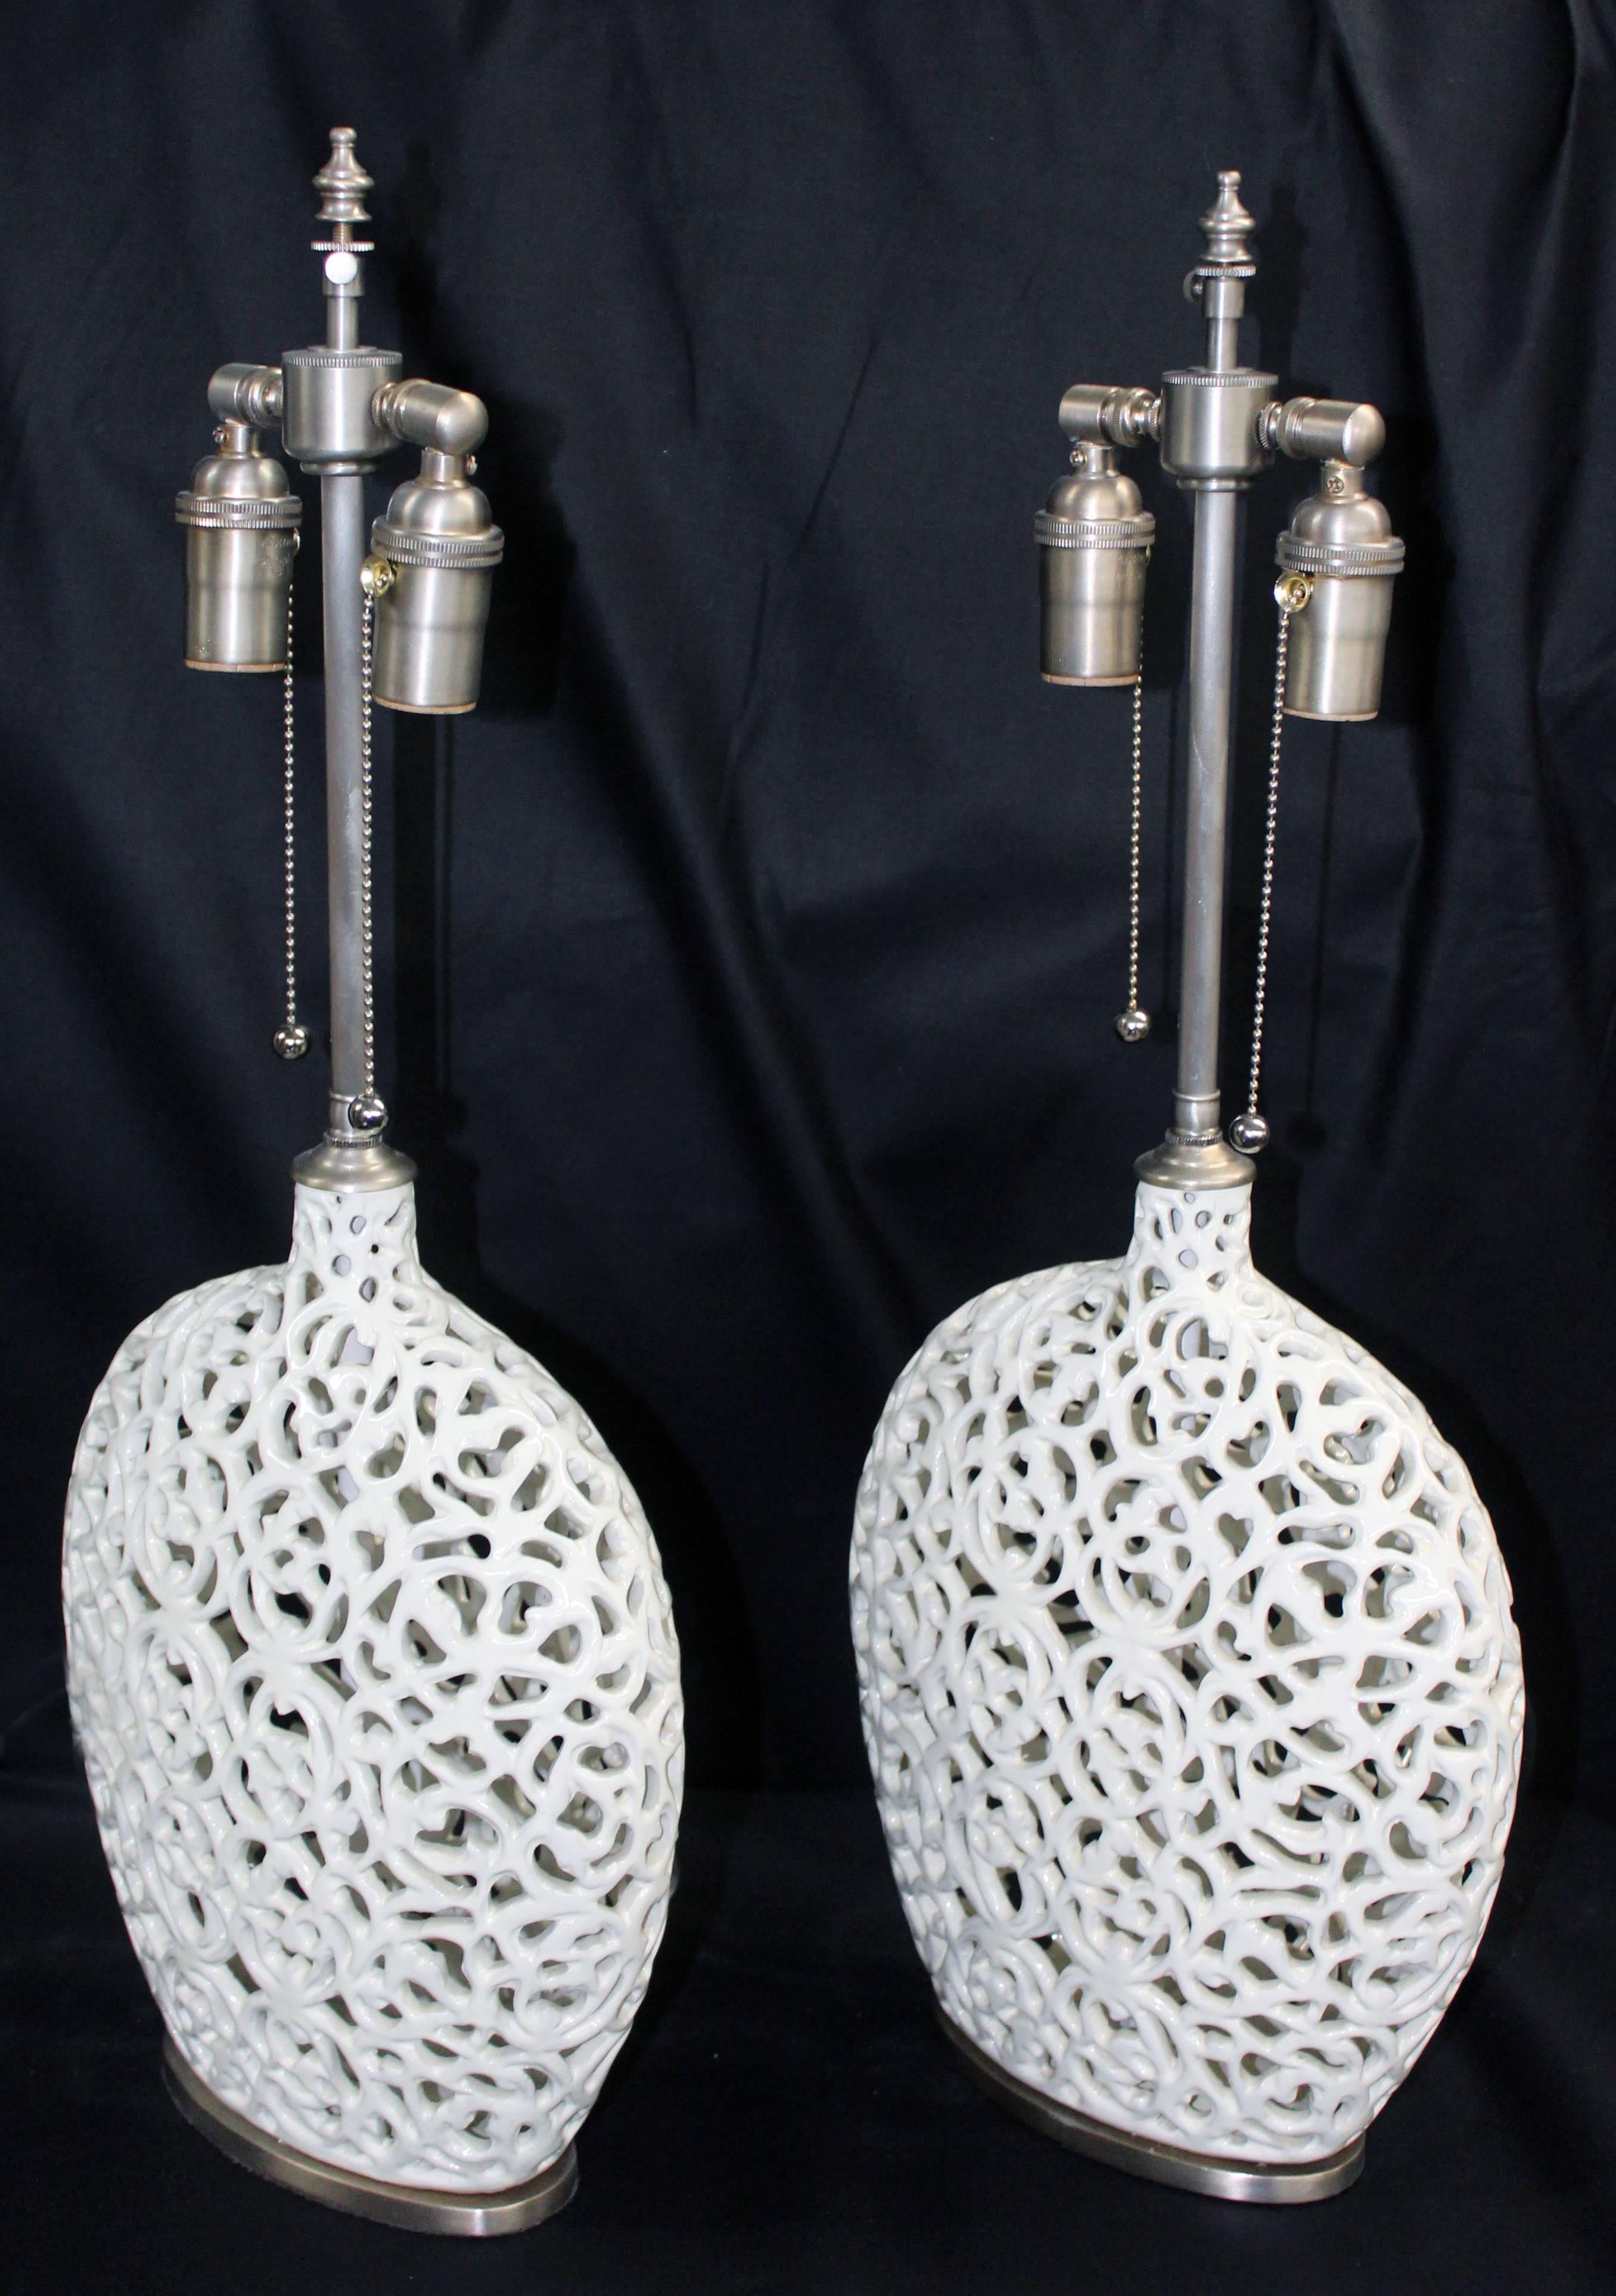 Unusual pair of cream colored ceramic filigree vessels with lamp application. The vessels are newly wired with Dual control chains. The vessel height is 13